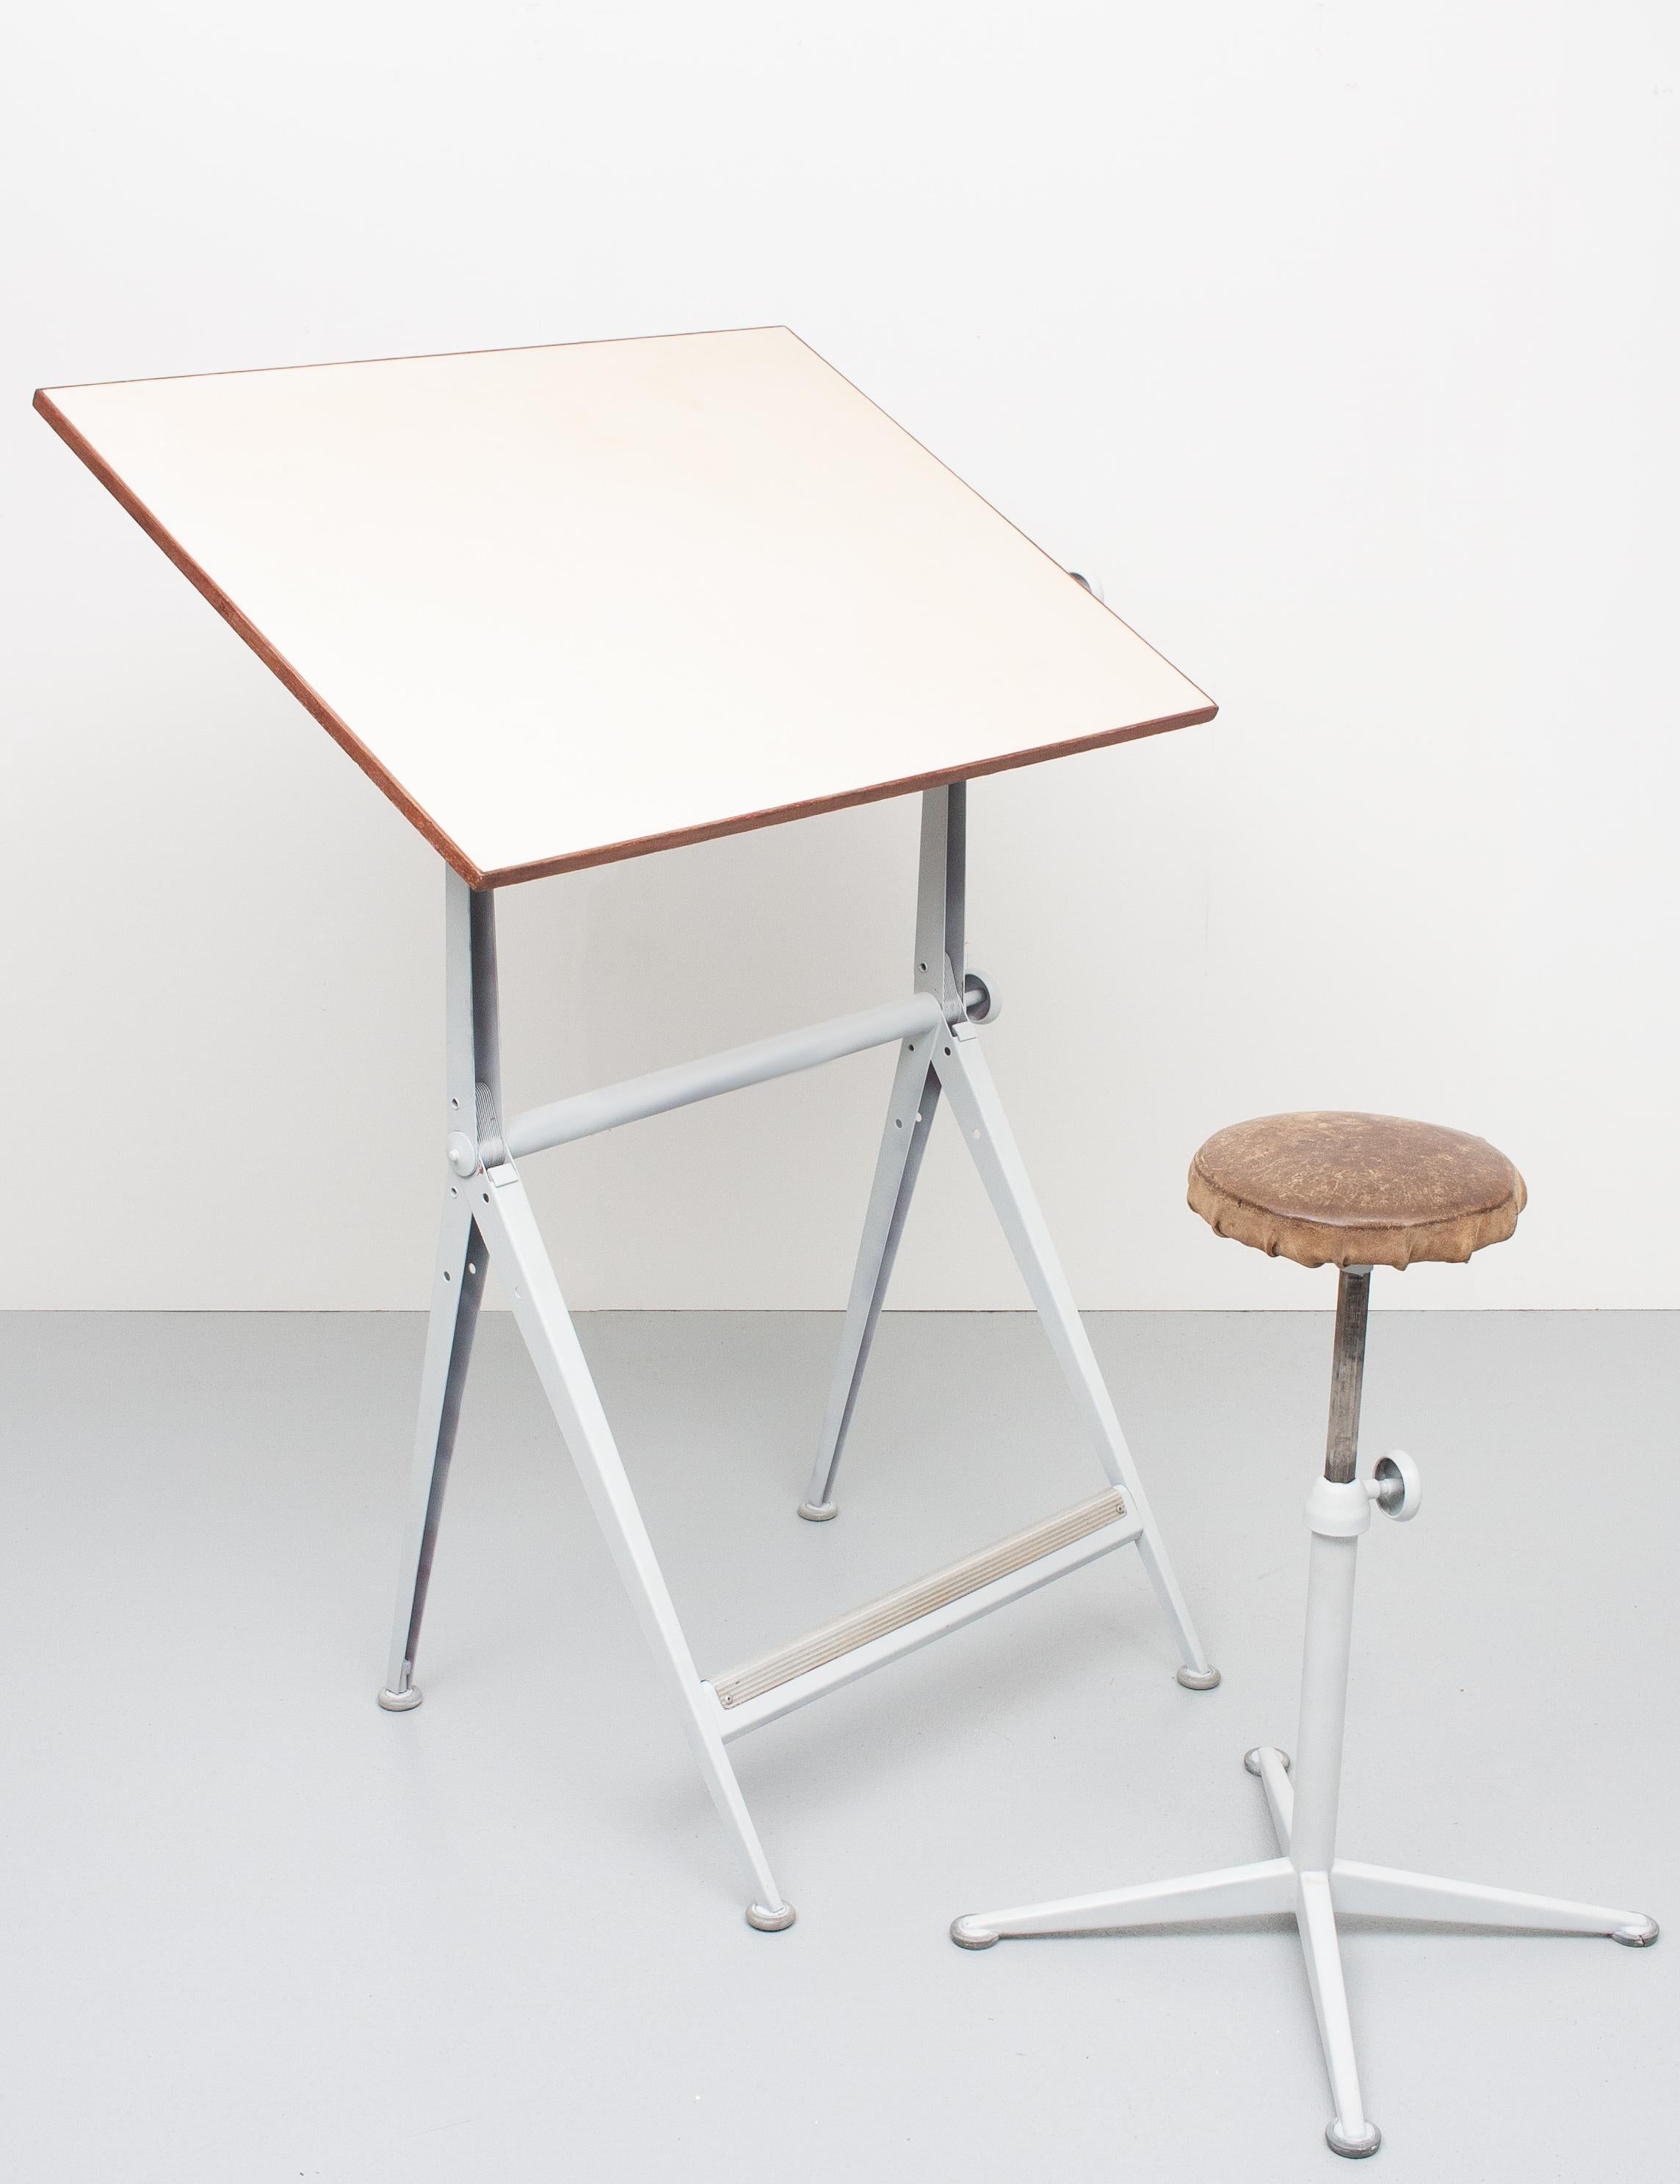 Reply drafting table designed by Wim Rietveld in 1959 and designed by the metal company De Cirkel NV (Ahrend). Wim Rietveld received for this design in Brussels the “Signe d’Or award. This drafting table is fully adjustable by means of two knobs.